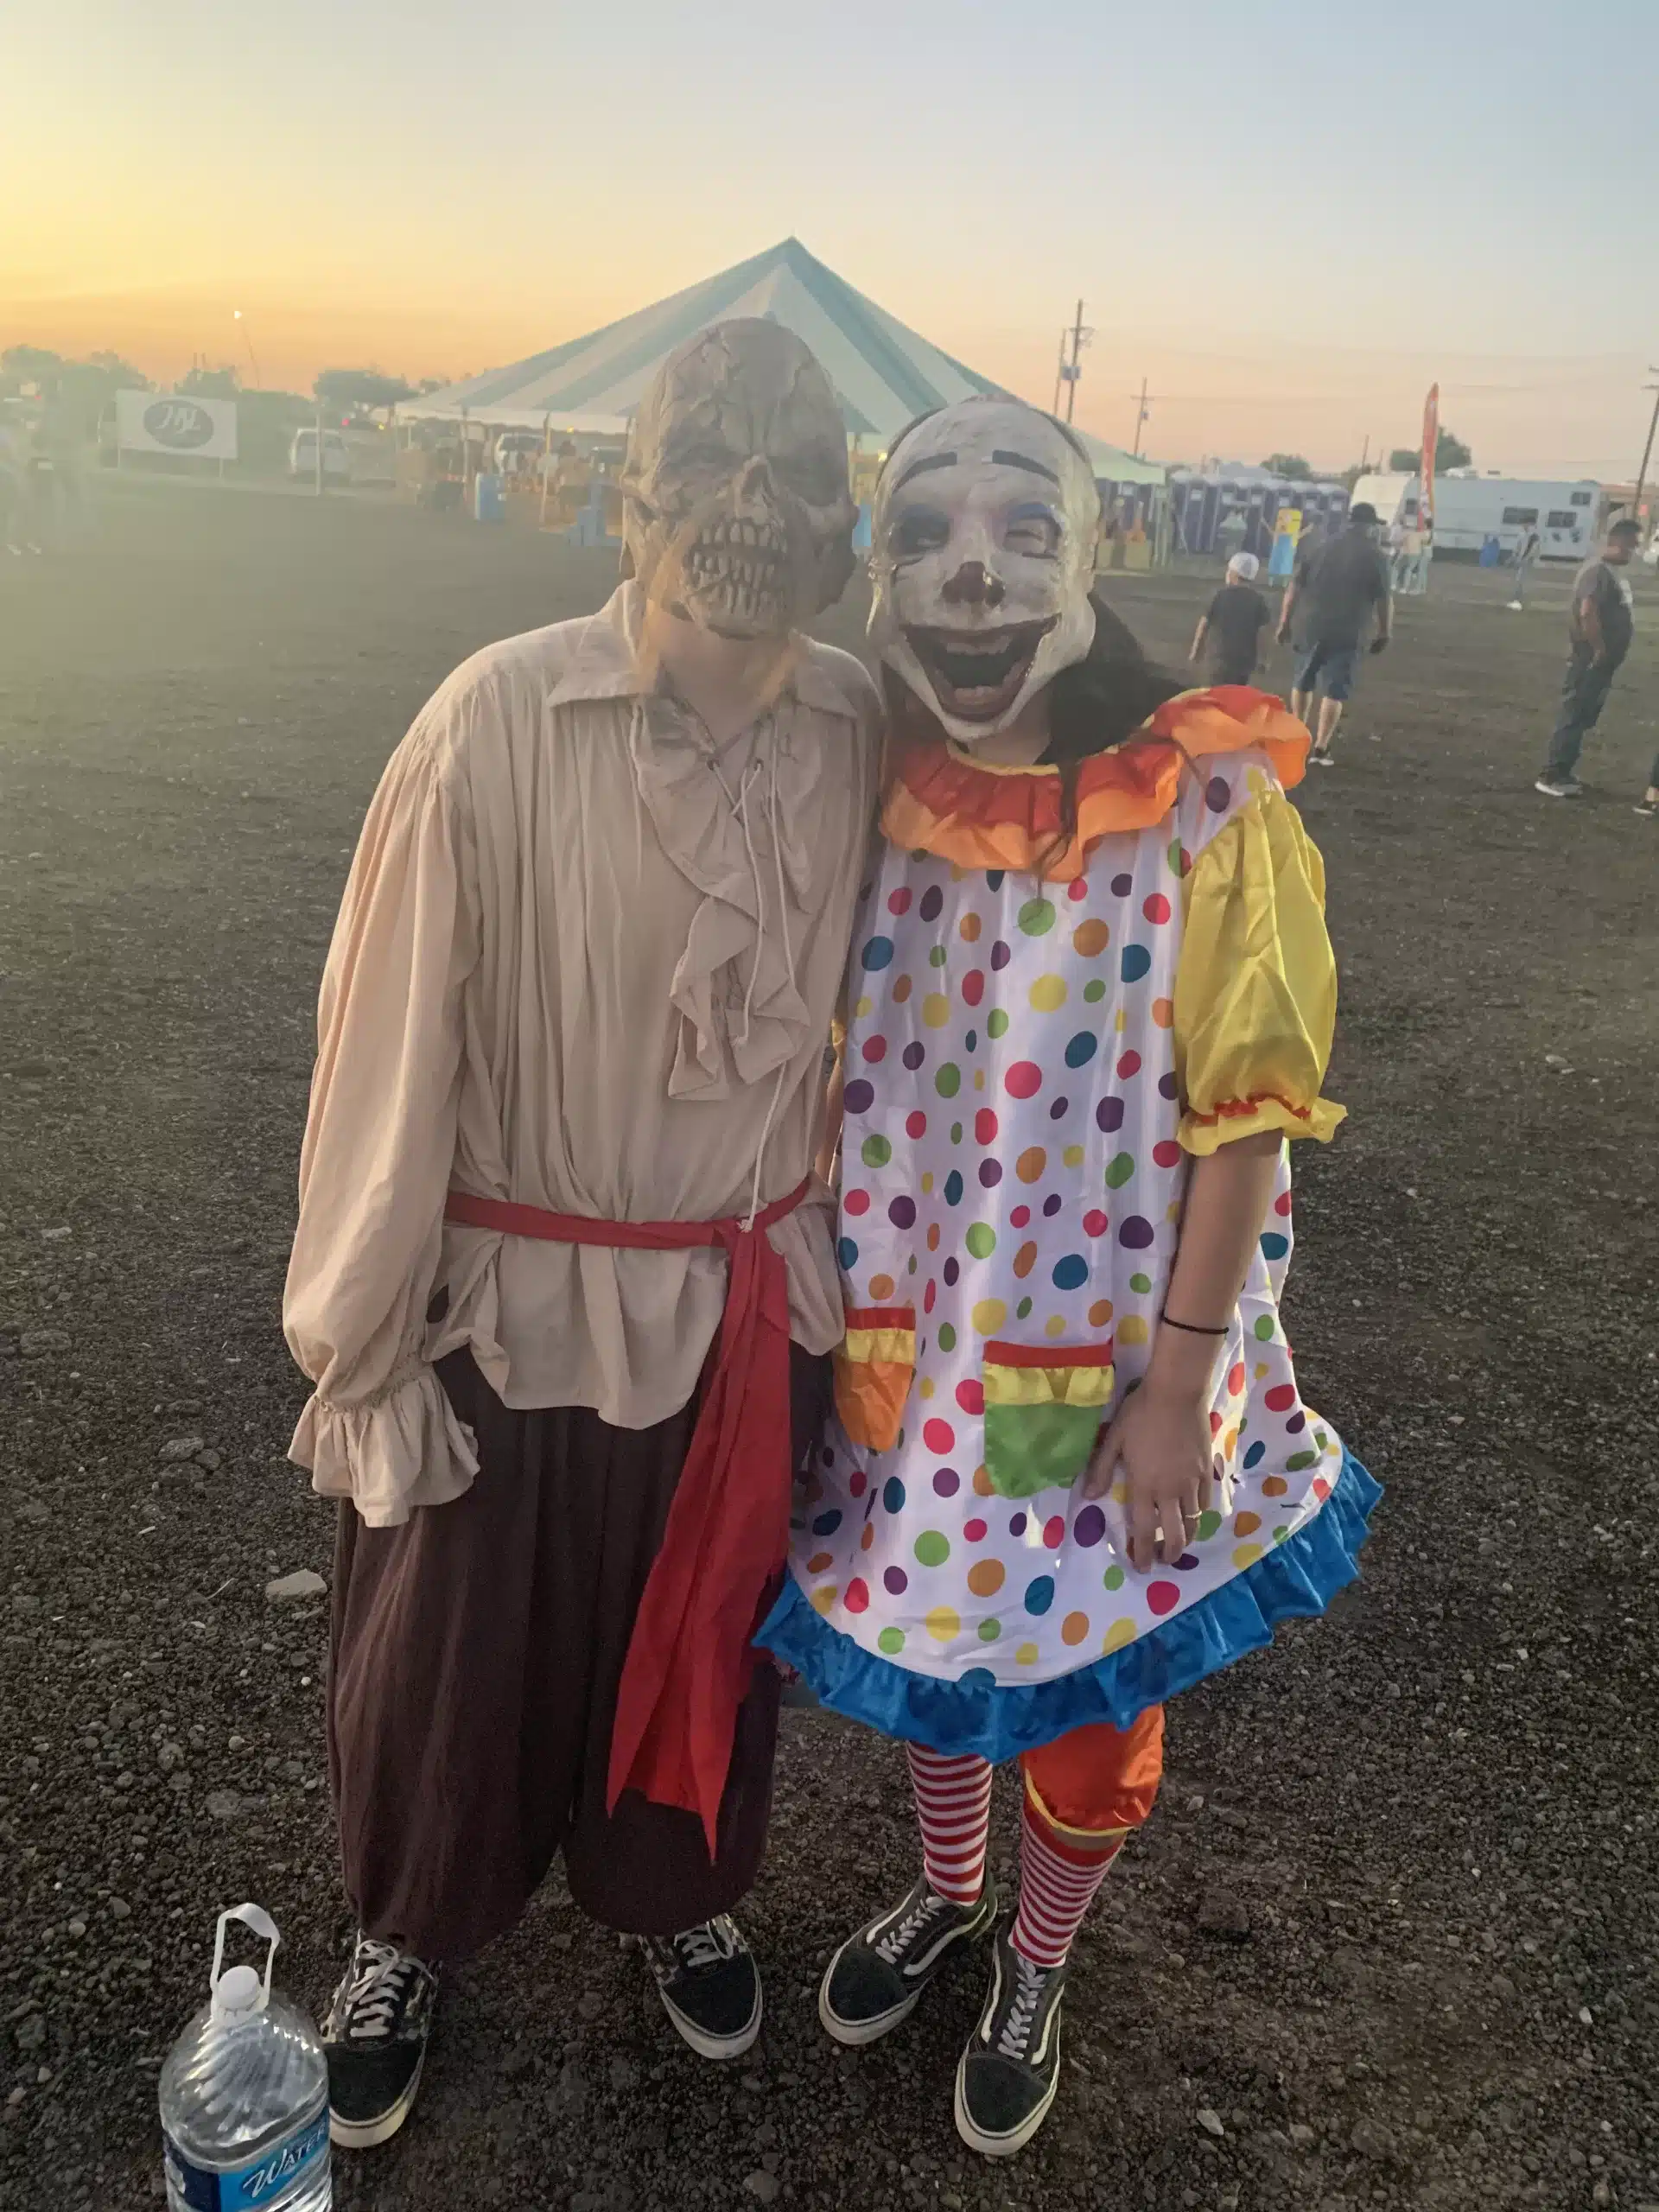 Scare Squad Clown and Scary Pirate at Tucson Terror in the Corn During Sunset